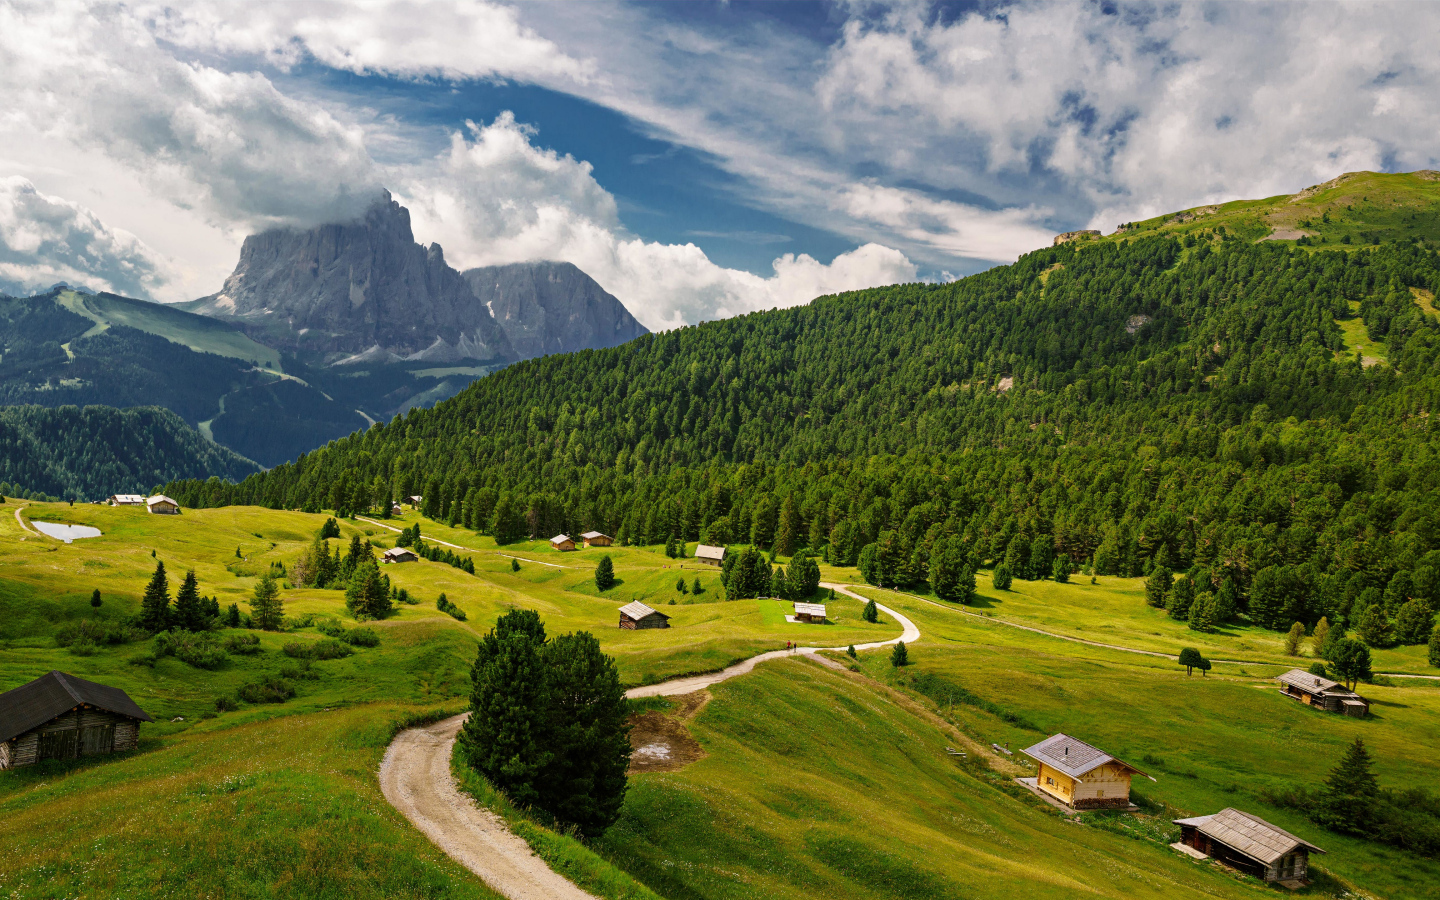 View of the forest and the alps under white clouds, Italy